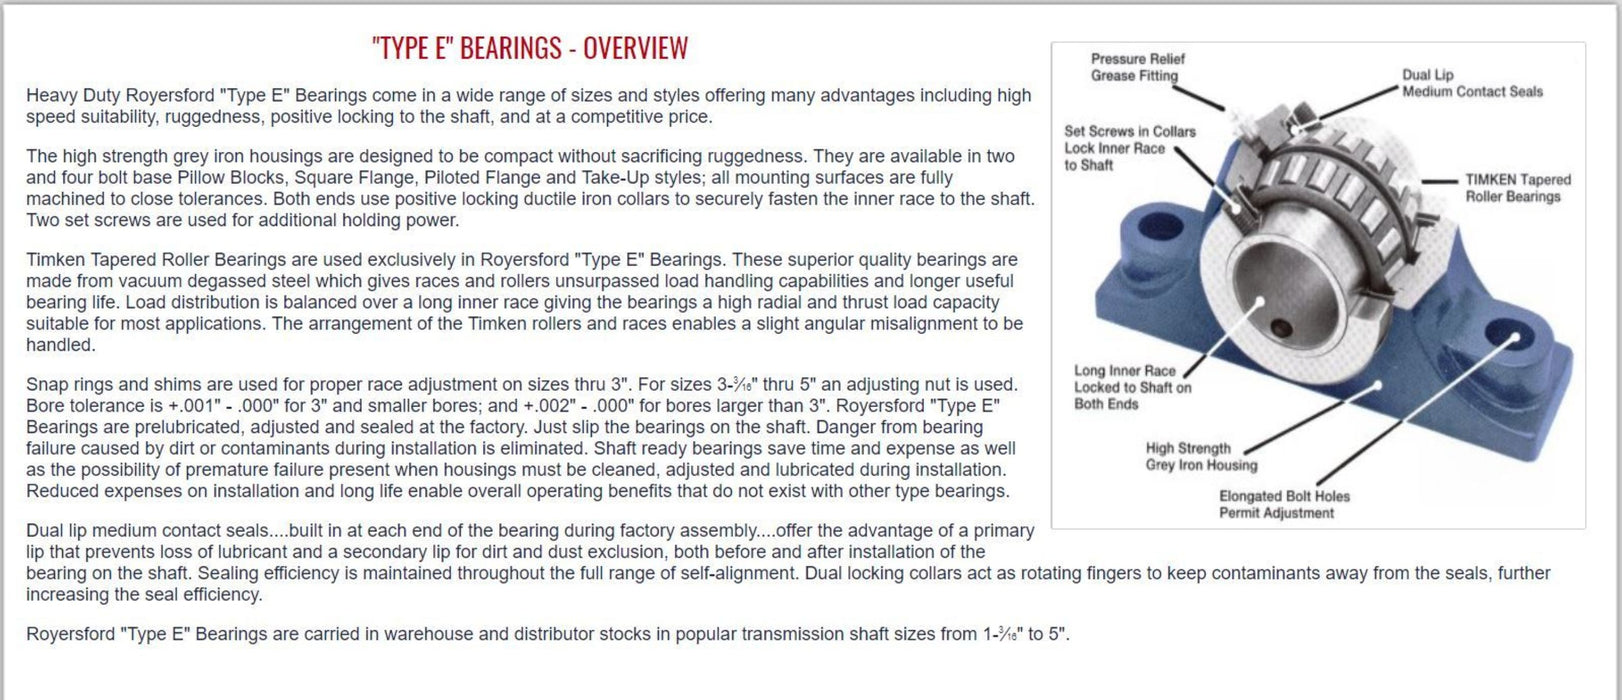 20-05-0204, Royersford Type E 4 Bolt Square Flange Bearing, 2-1/4" with Timken Tapered Roller Bearings